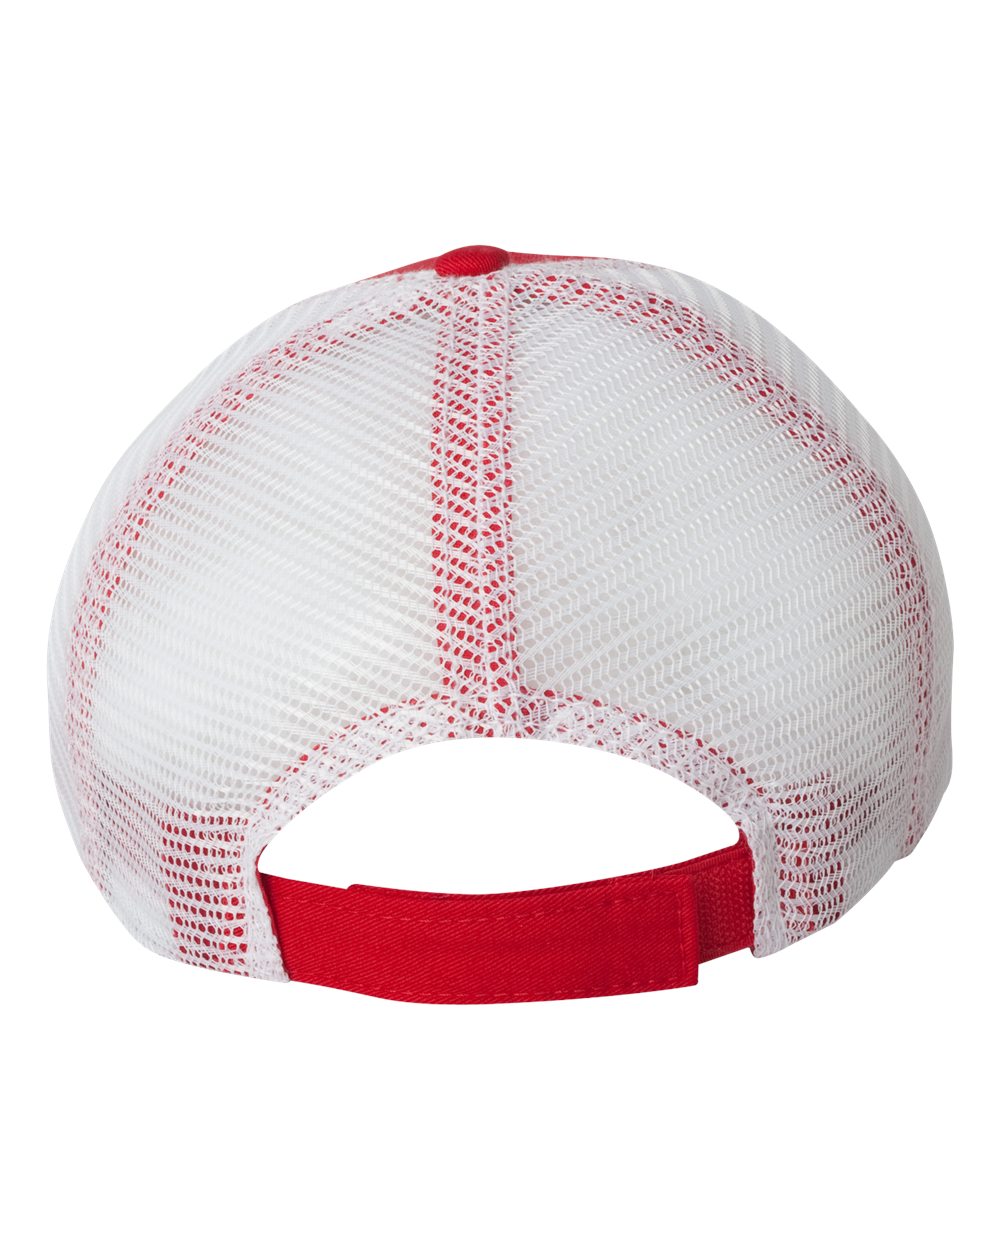 Sportsman Bio-Washed Trucker Cap AH80 #color_Red/ White